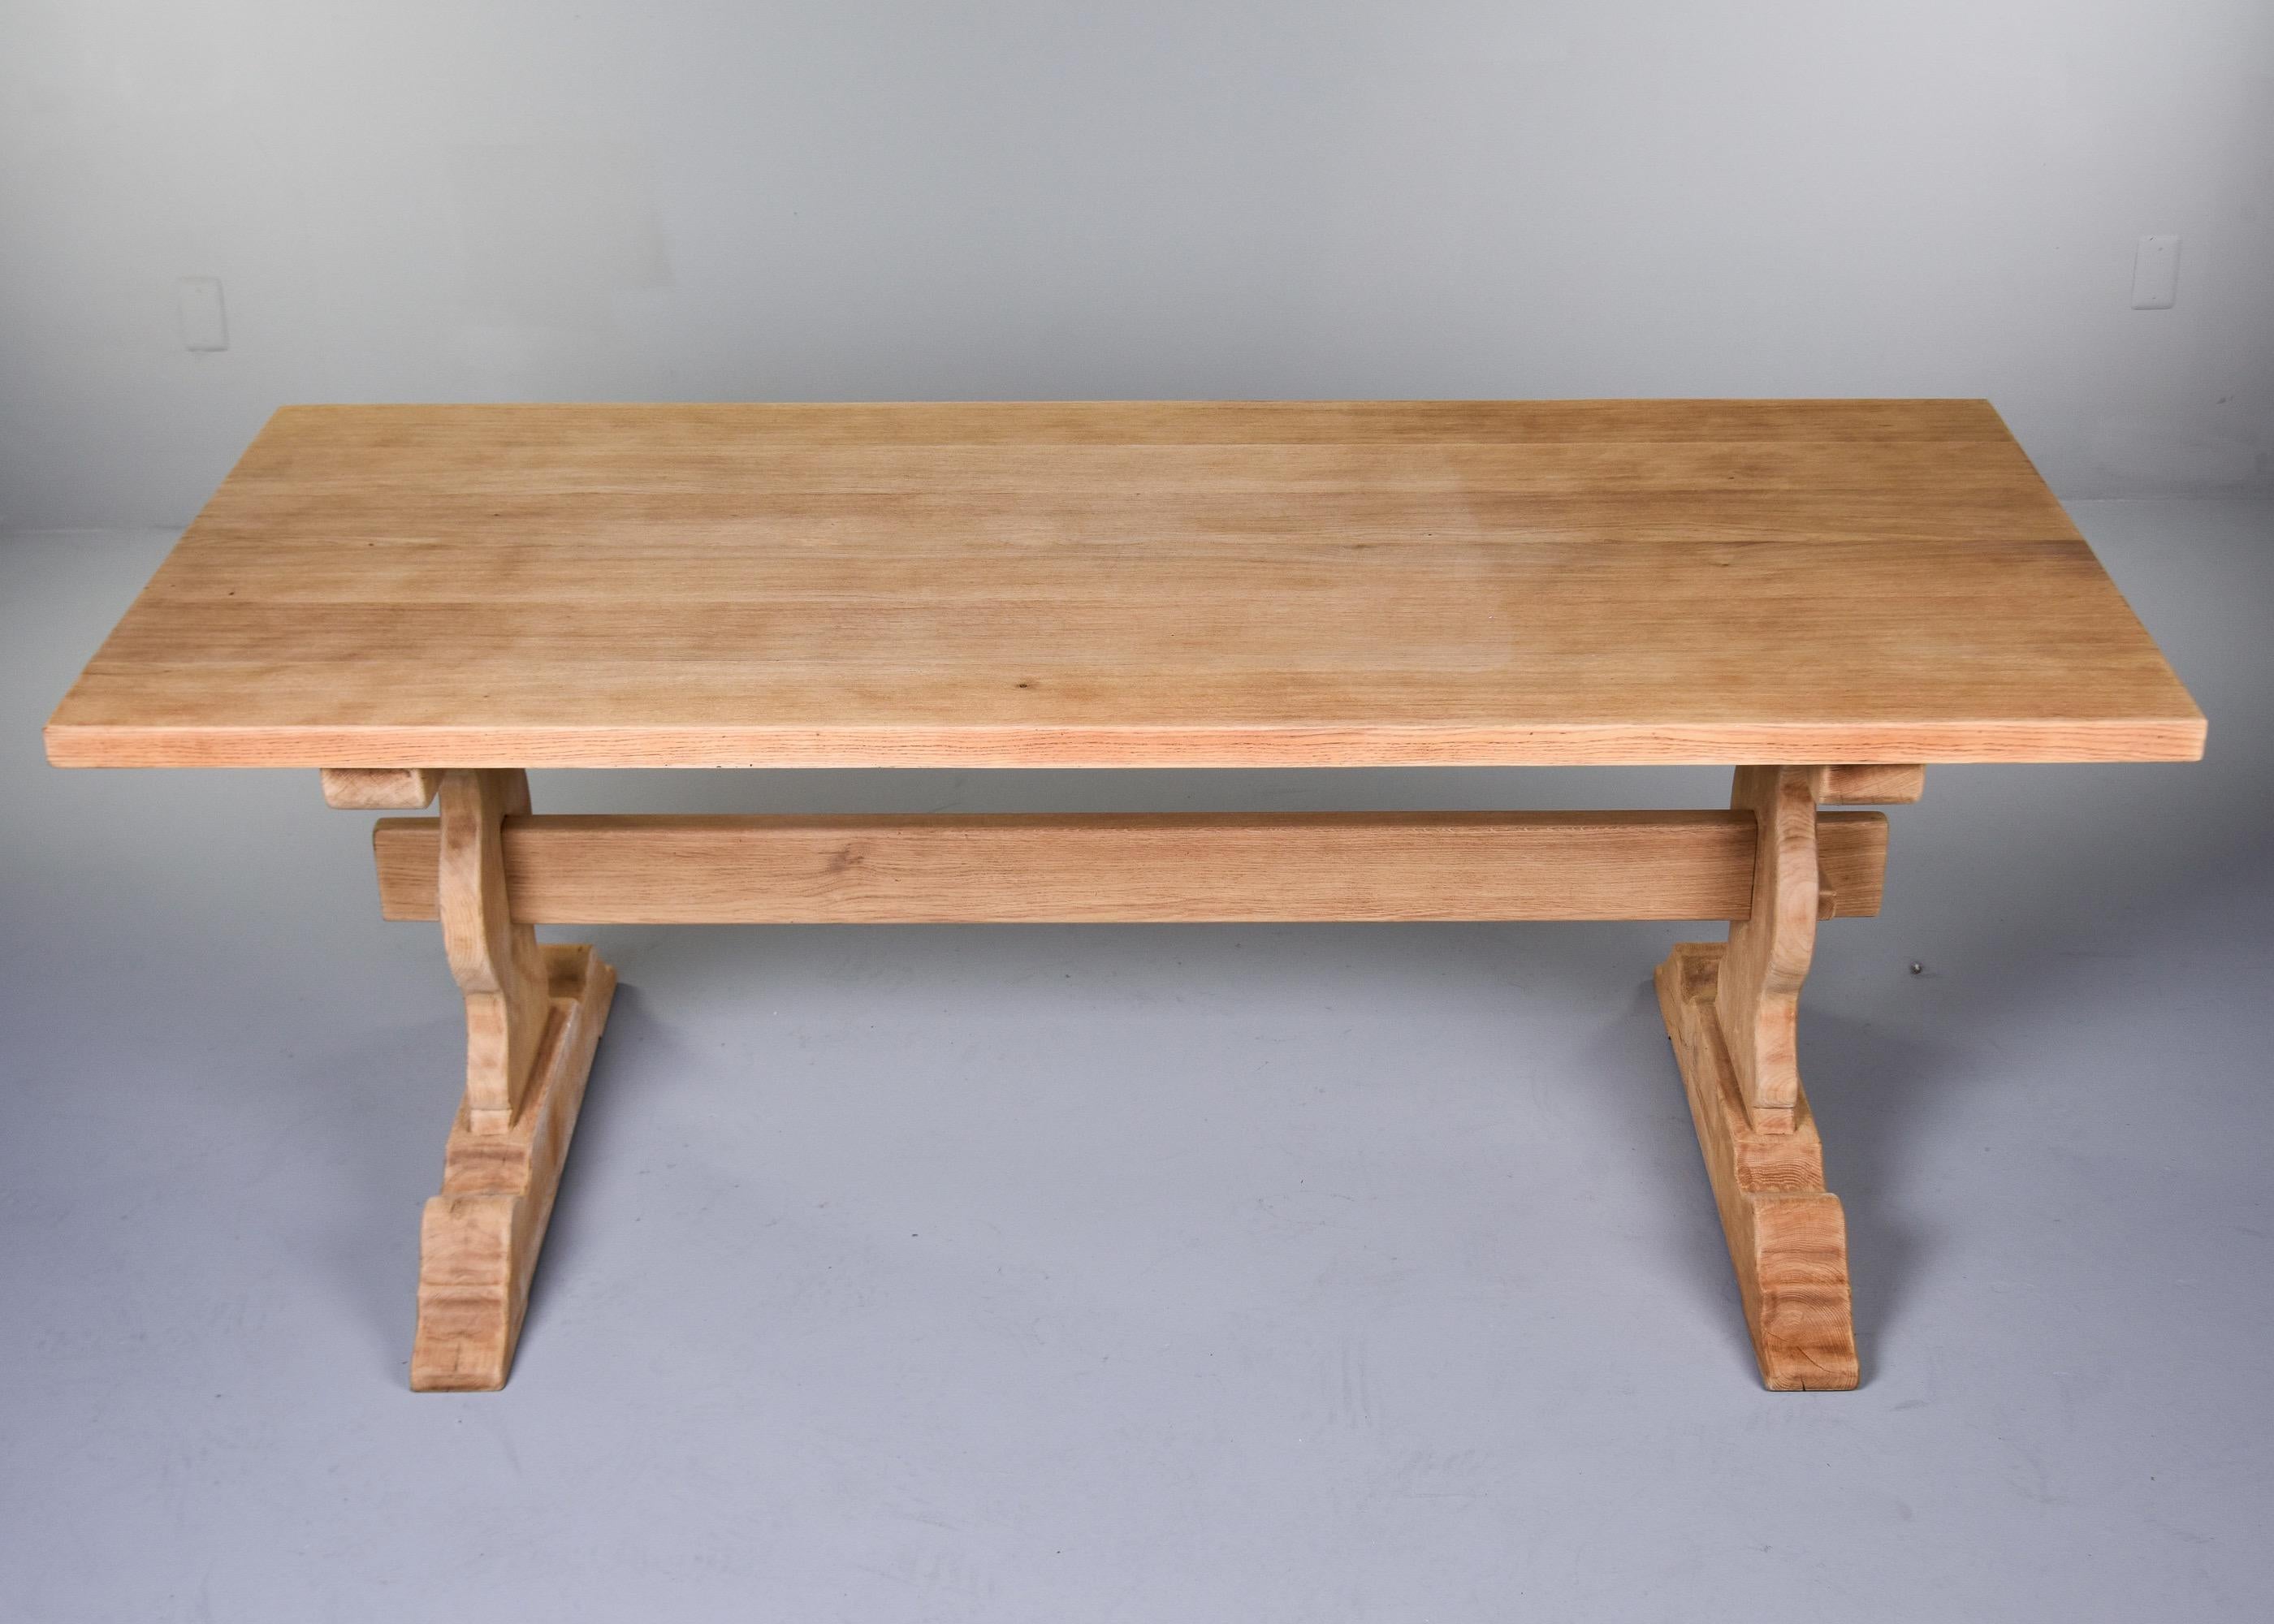 Circa 1900 French Bleached and Bare Sanded Trestle Table For Sale 4